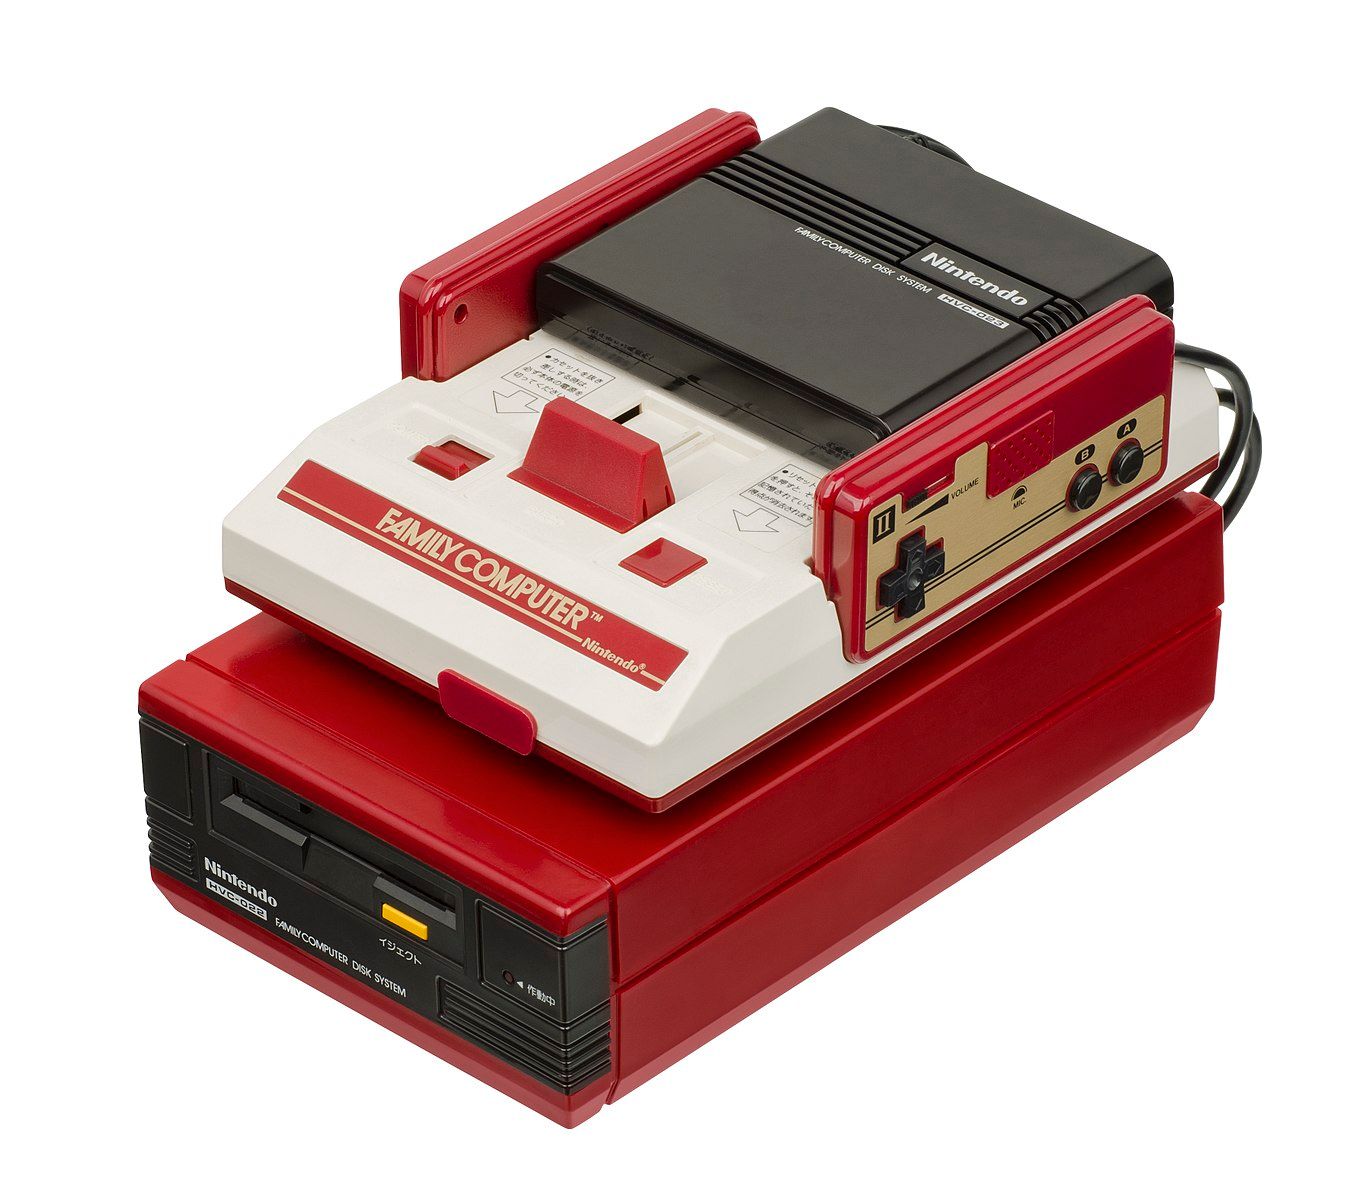 A picture of a Famicom disk system